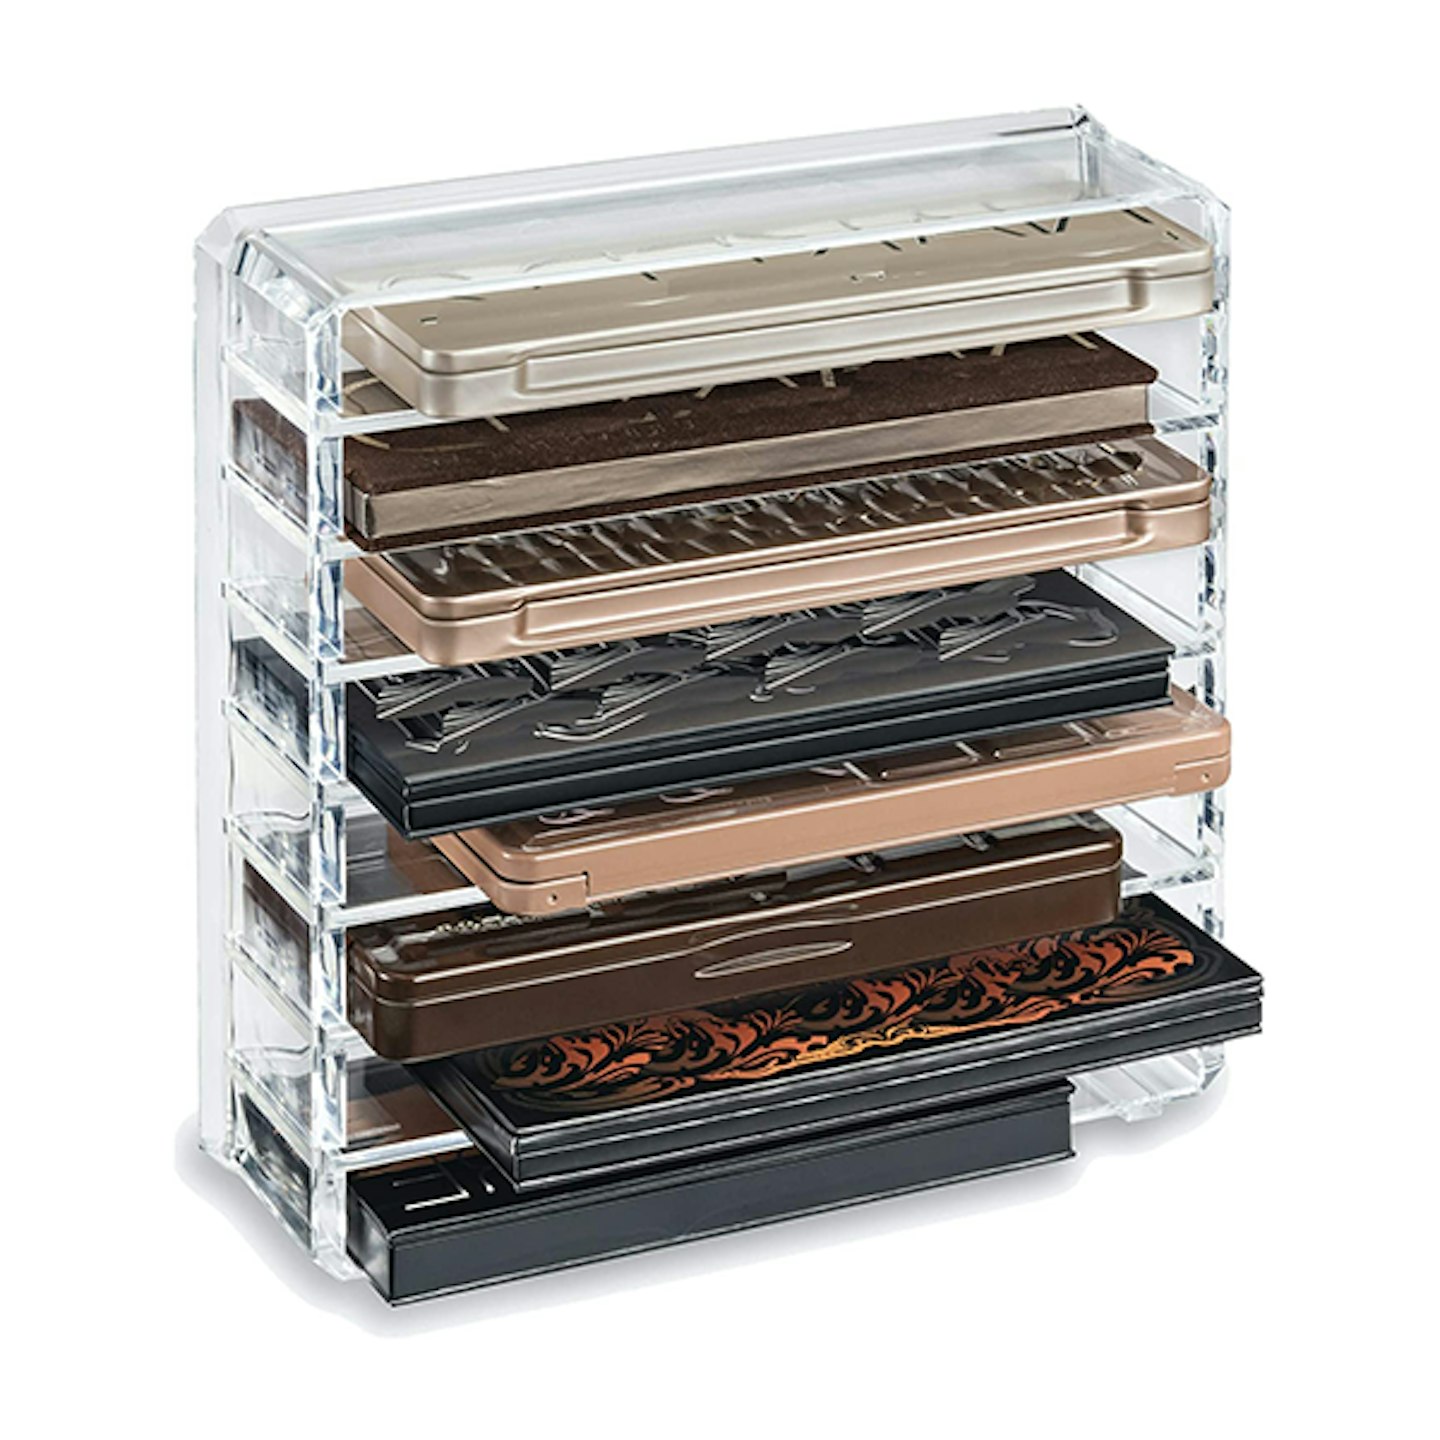 ByAlegory acrylic palette make-up organiser with removable partitions